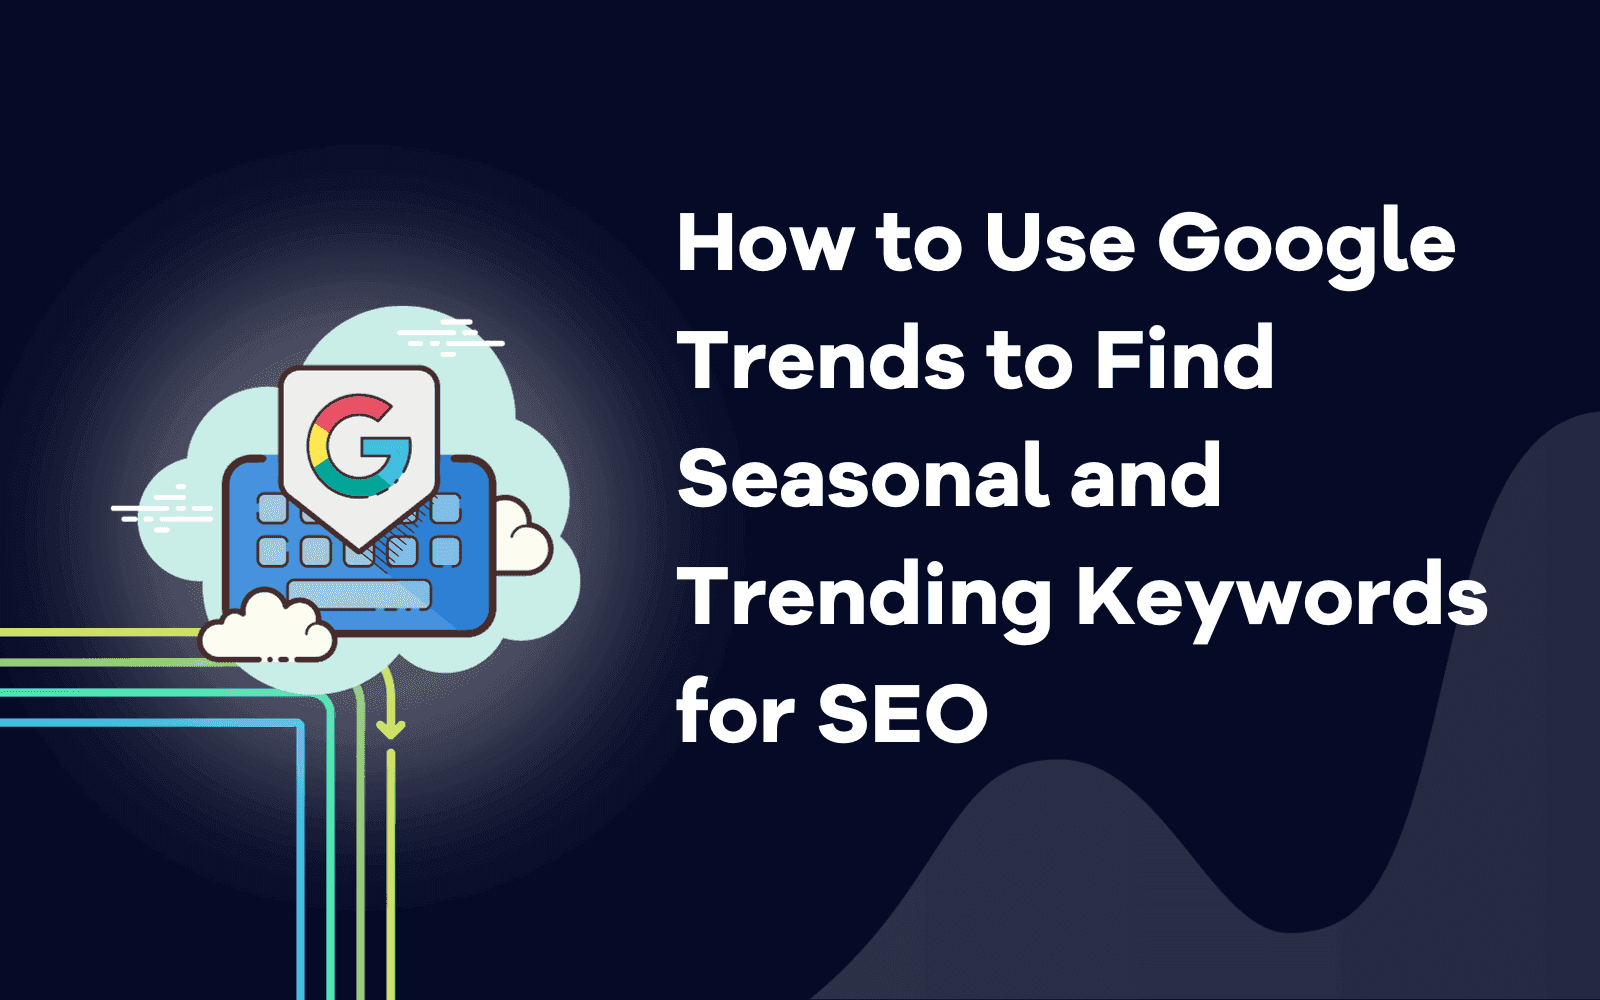 How to Use Google Trends to Find Seasonal and Trending Keywords for SEO